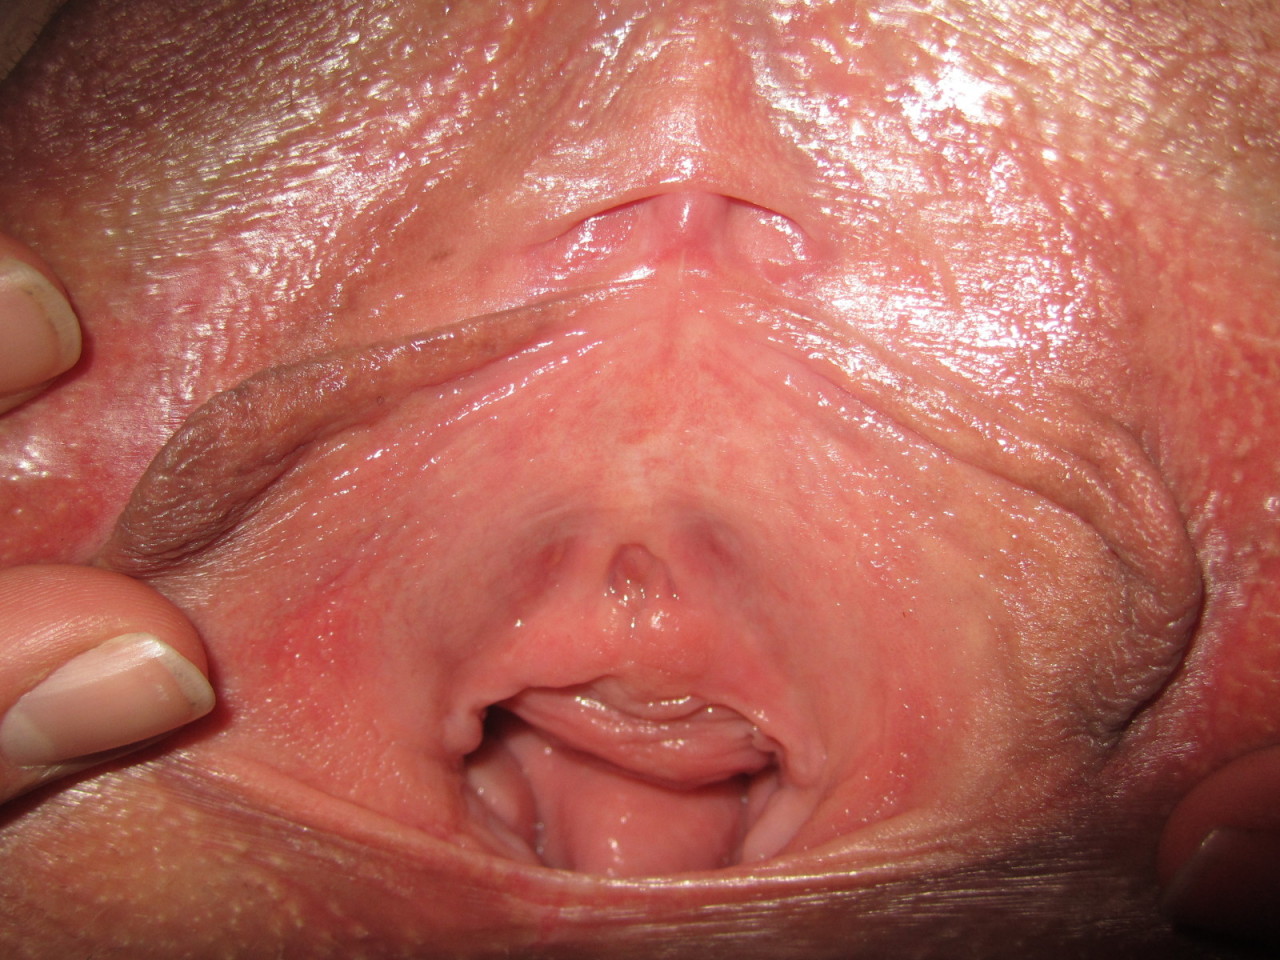 Gaping Pussy Hole Hardcore Sex Pictuers